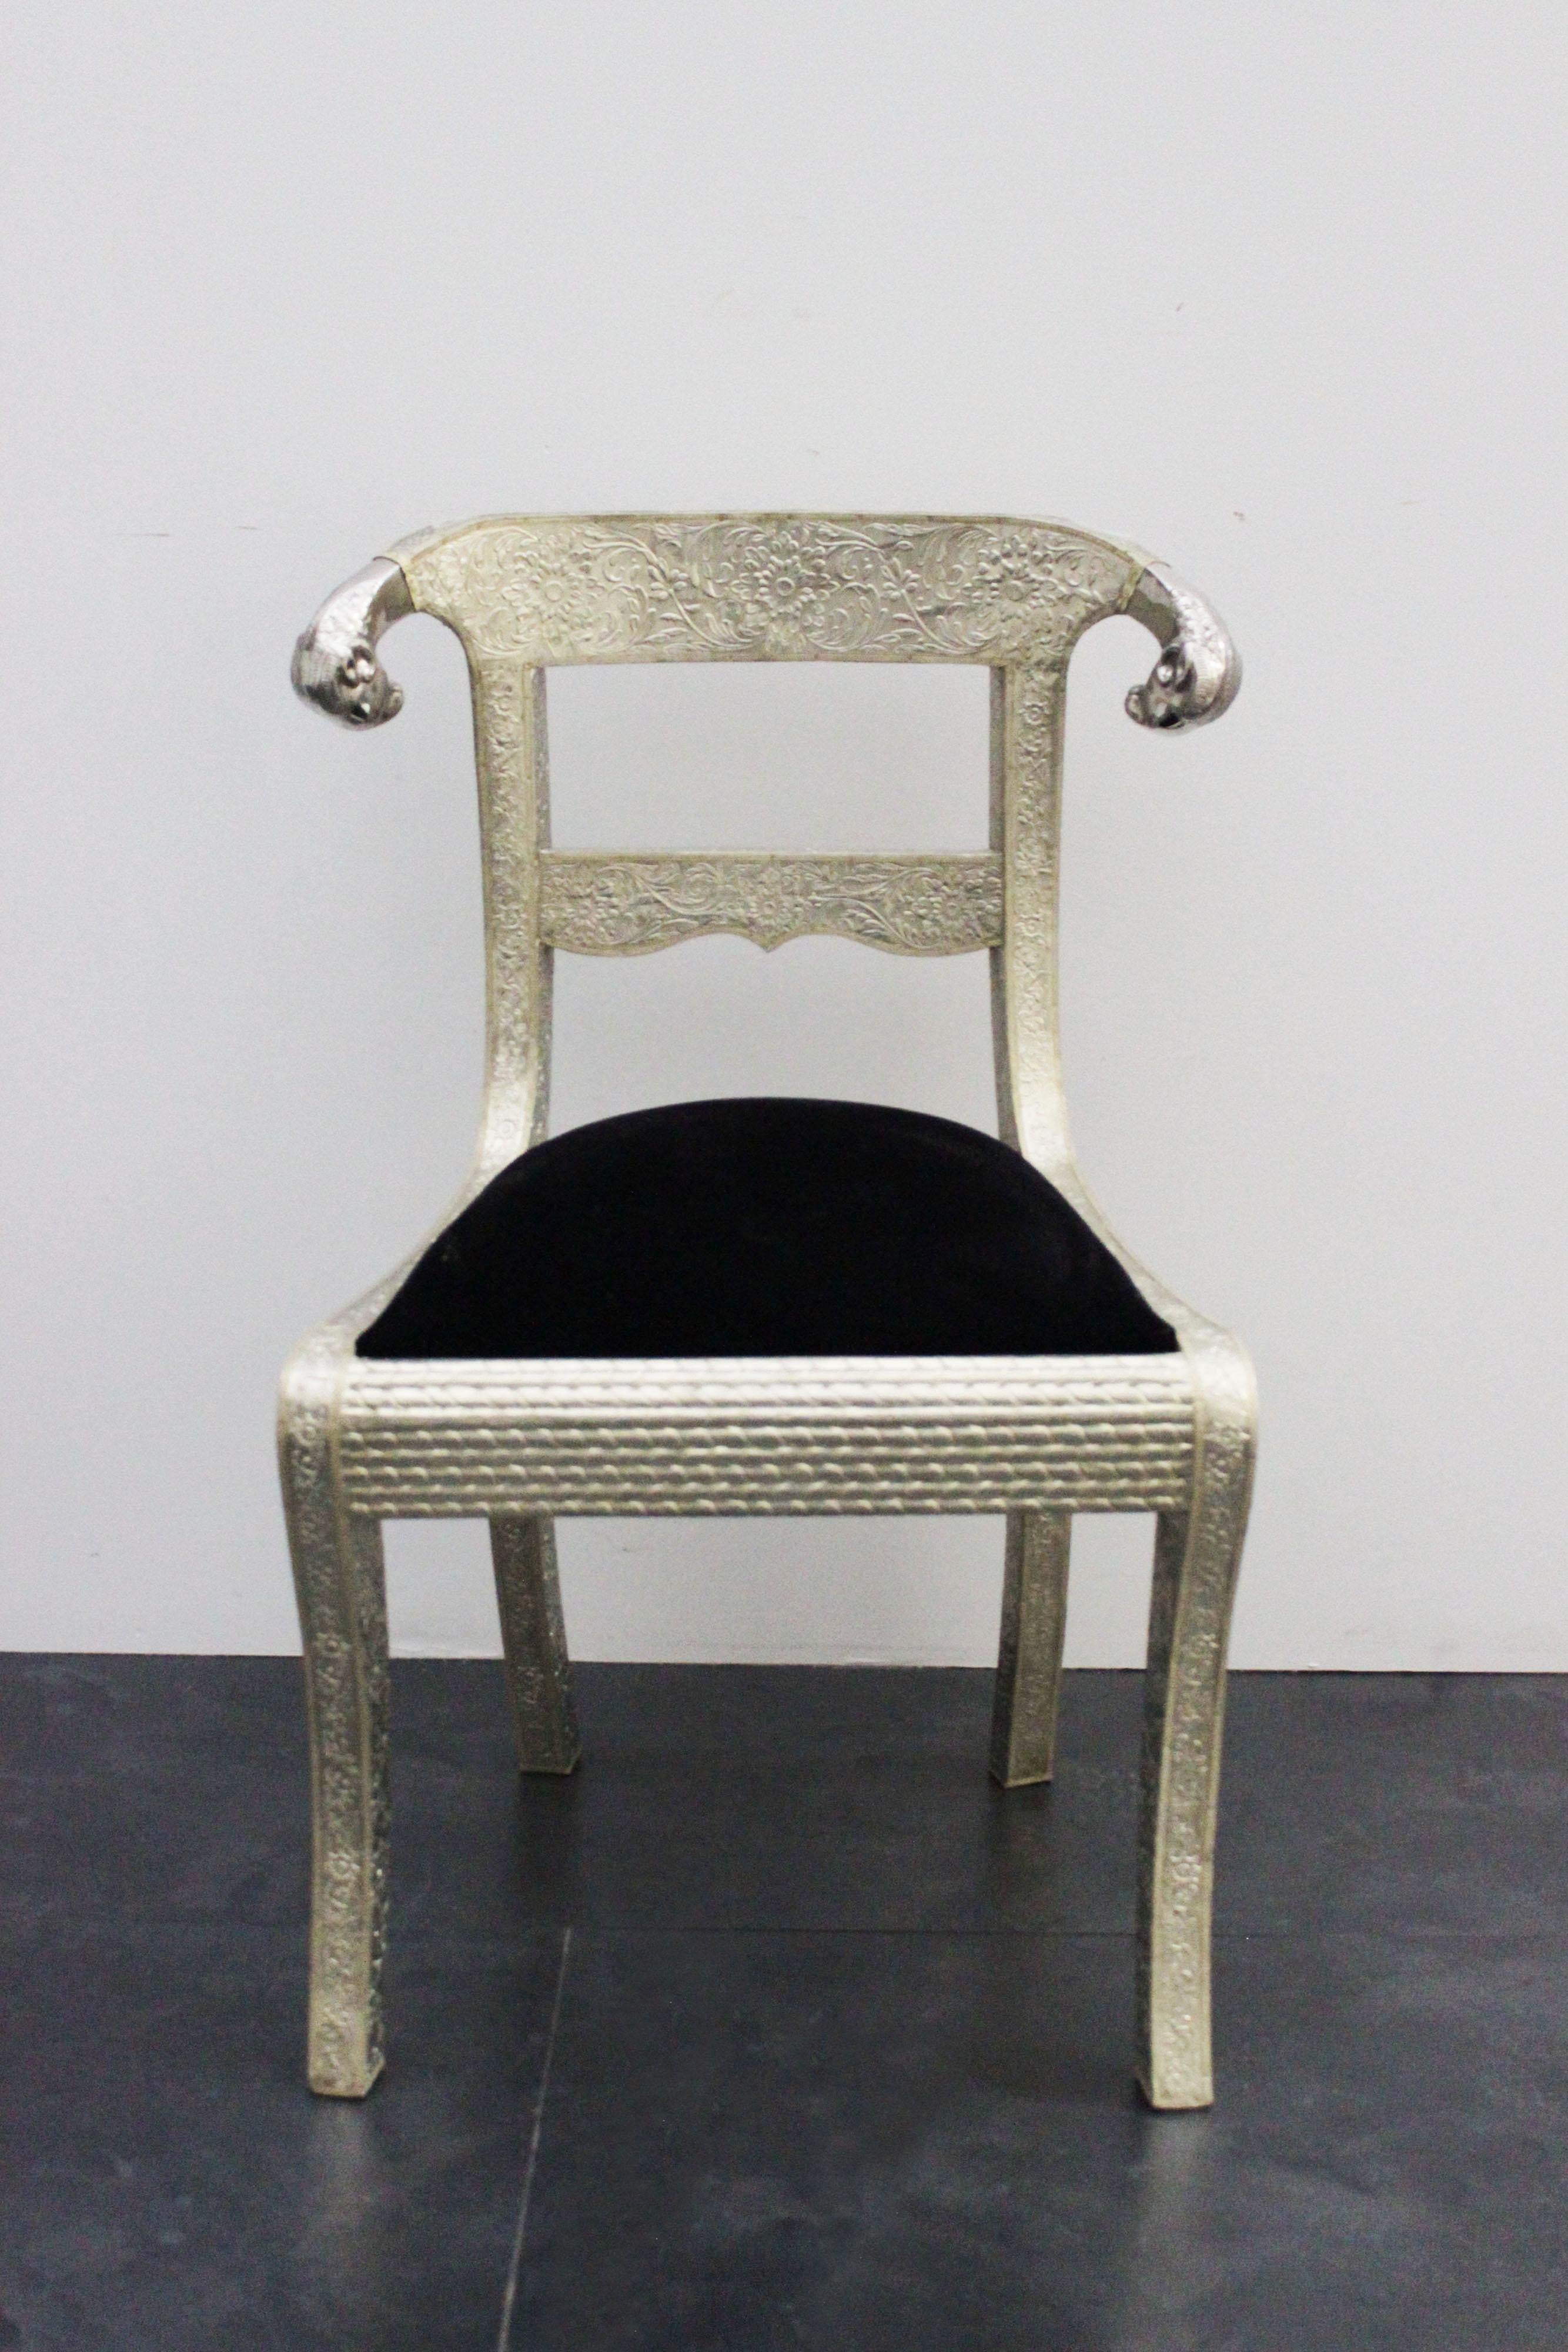 Anglo-Indian colonial dining chairs with structure upholstered in silver-plated metal, with backrest complete with steel ram-shaped zoomorphic heads and velvet seats in various colors. Available - 6 chairs.